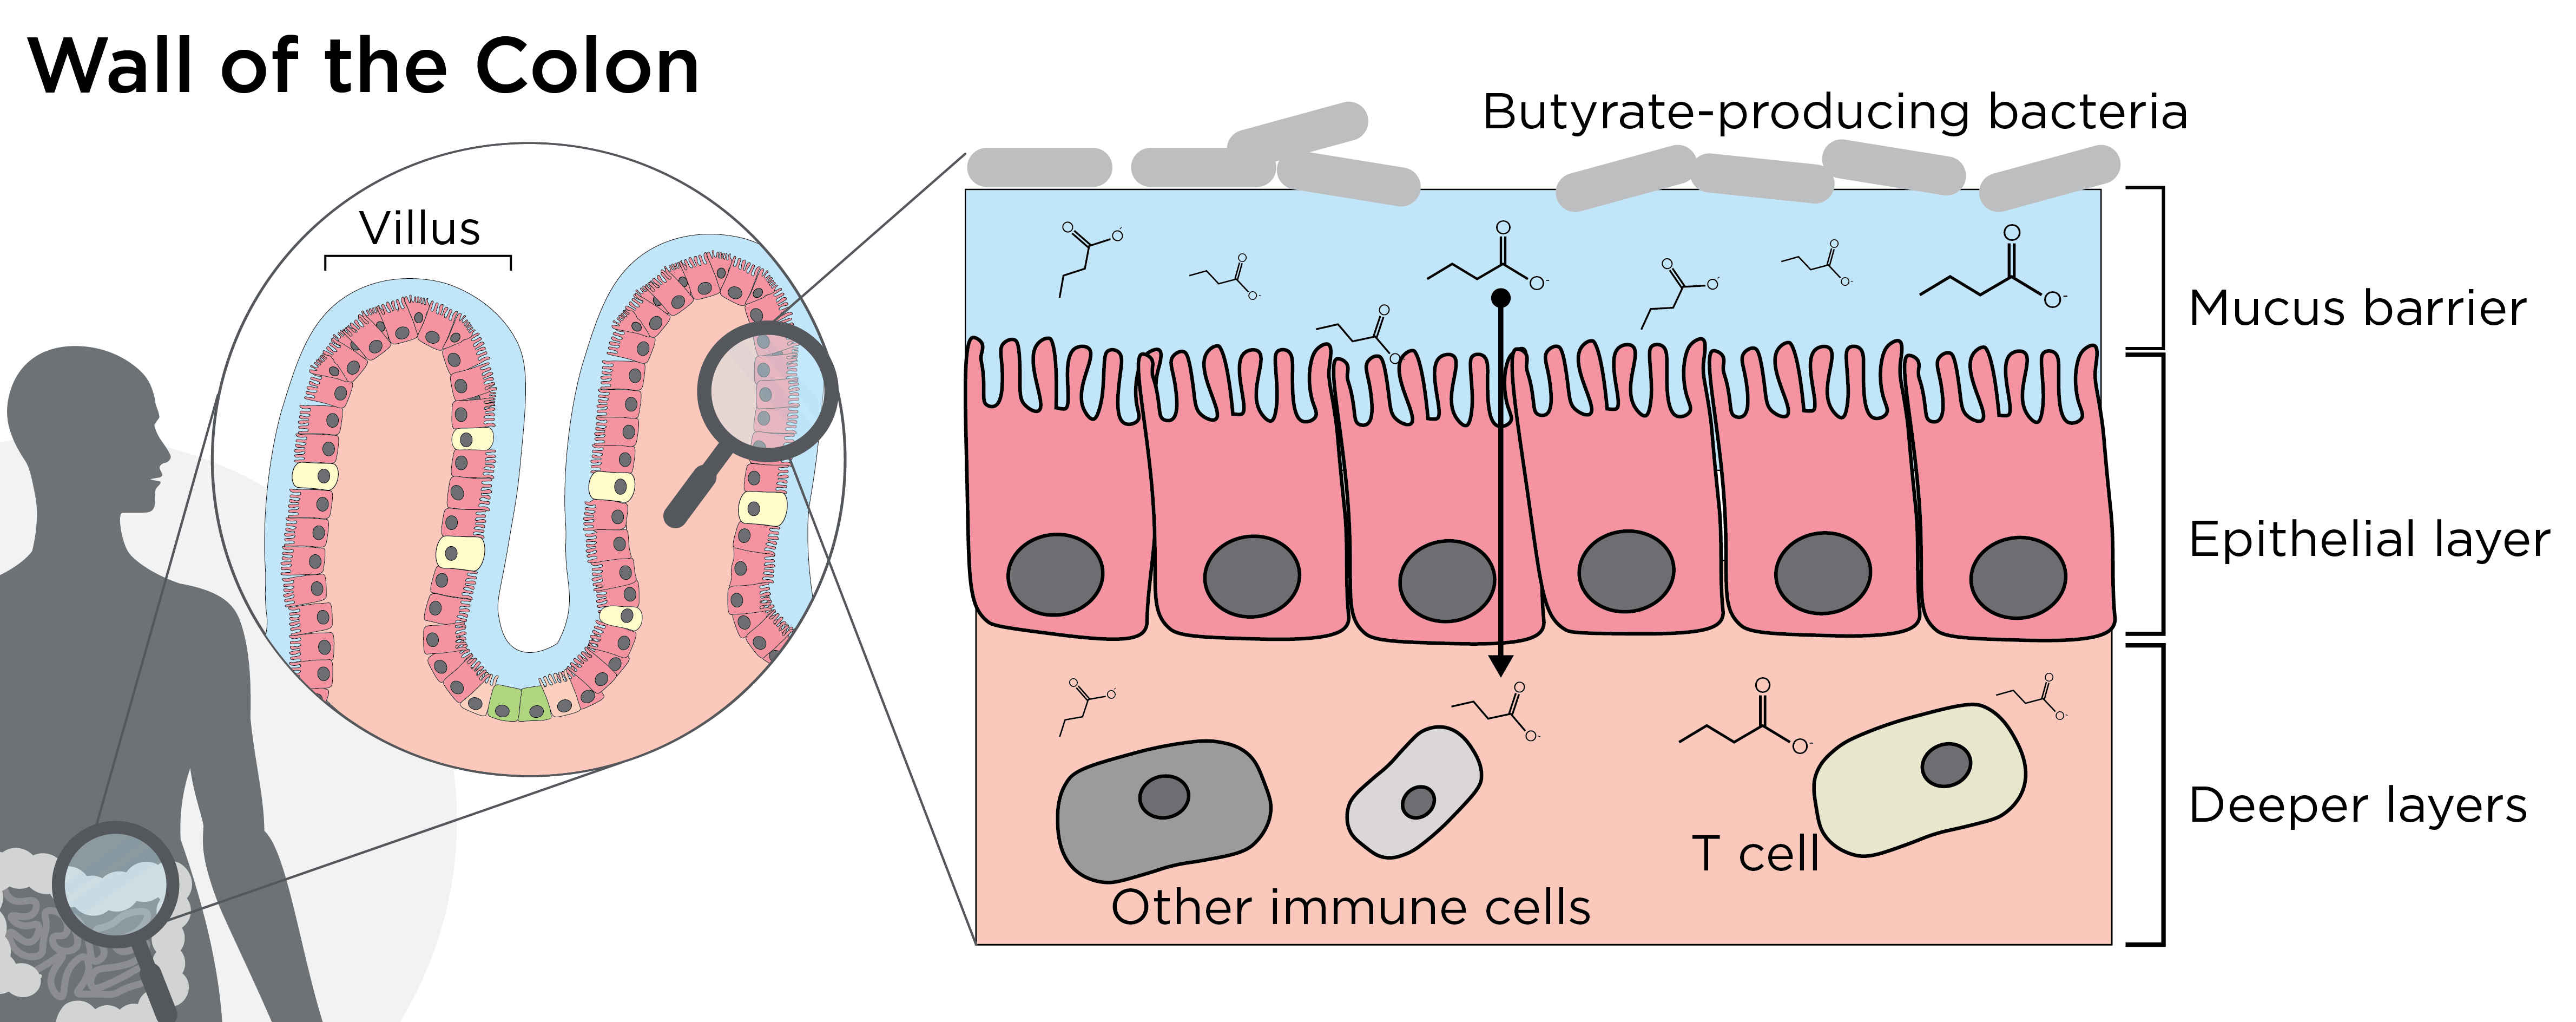 Butyrate producing bacteria in the colon